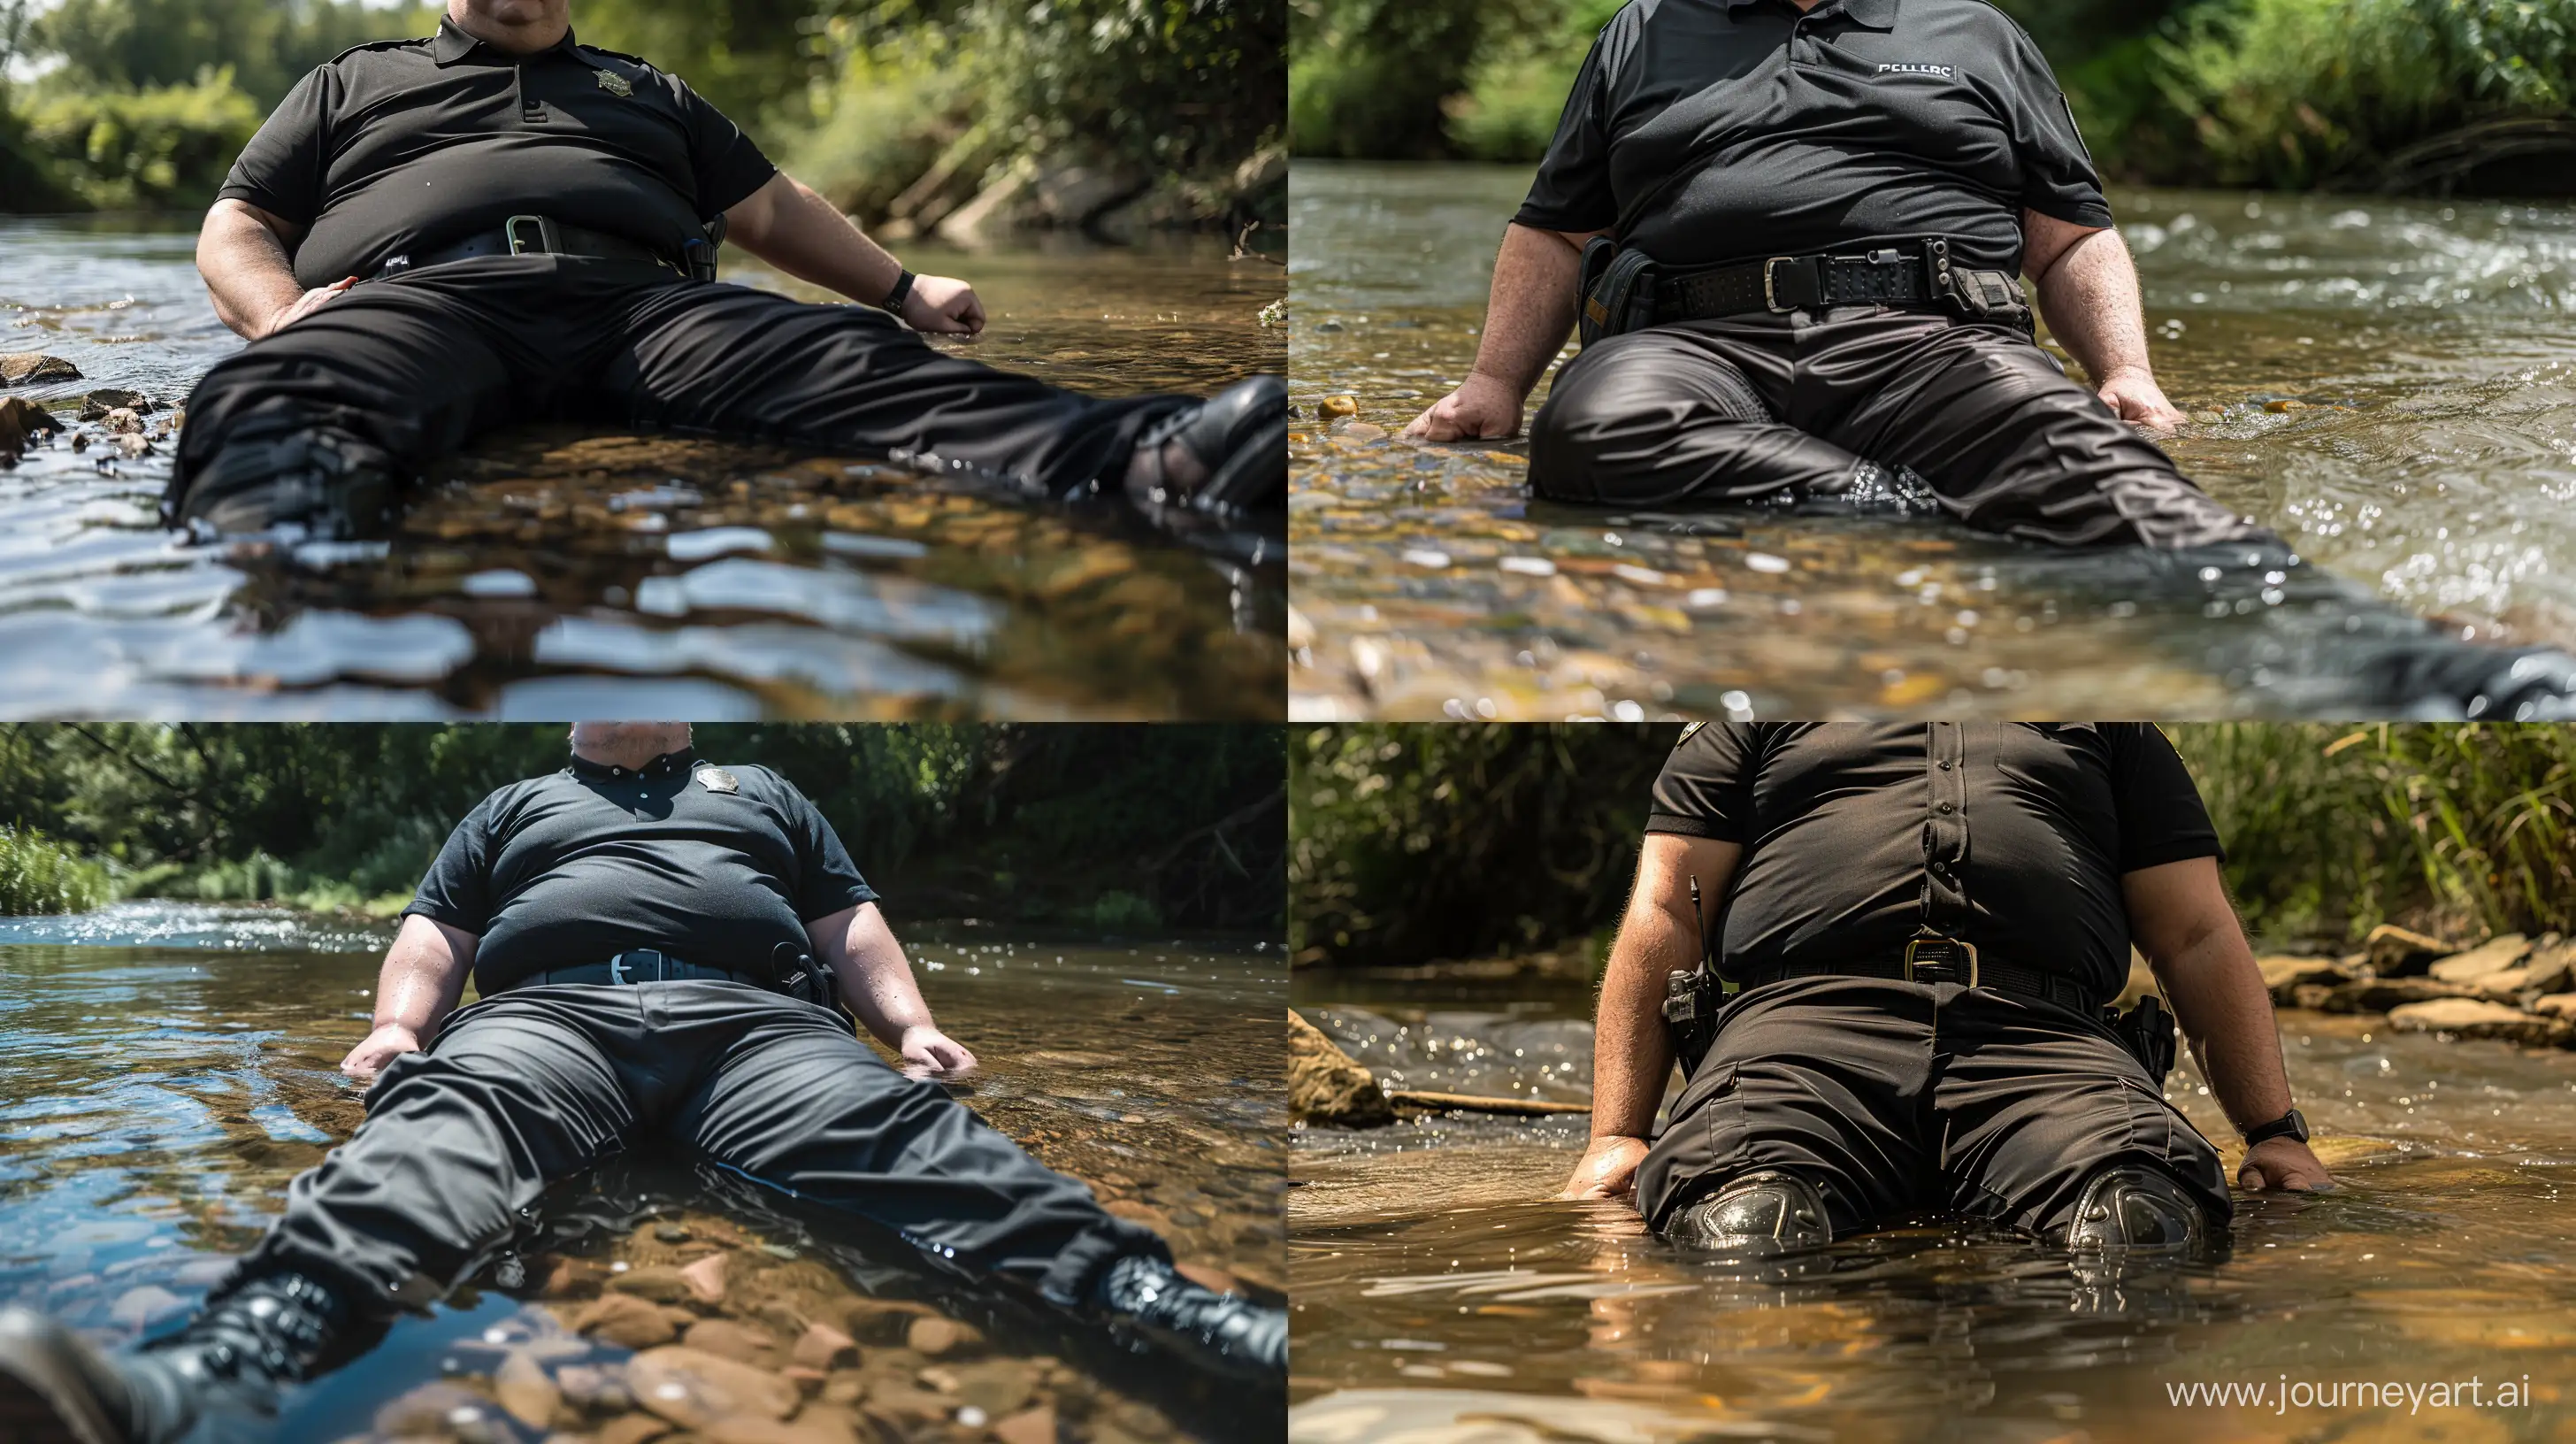 Mature-Security-Guard-Relaxes-by-the-River-in-Stylish-Black-Ensemble